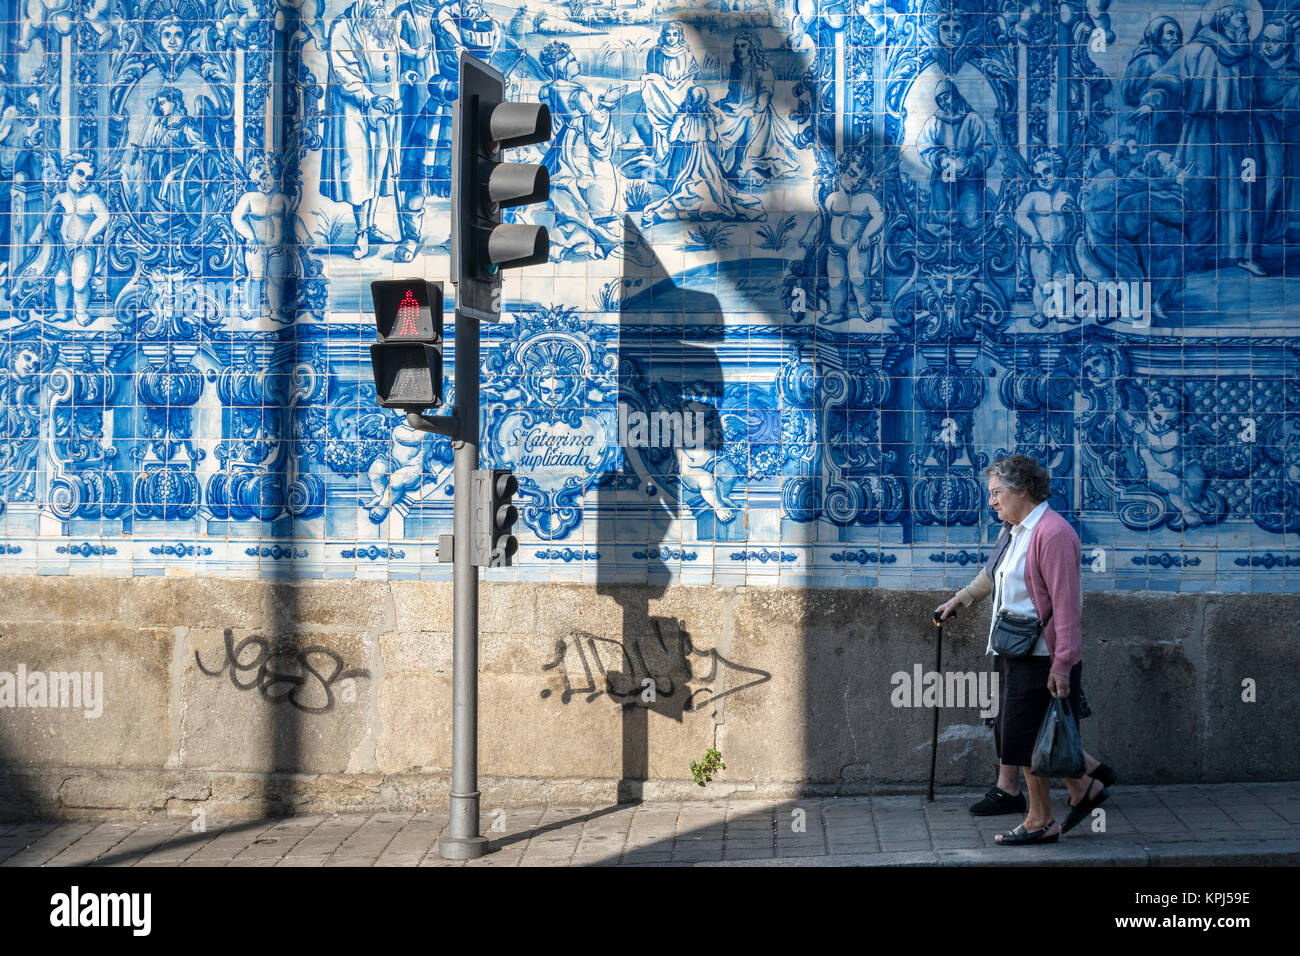 Traditional, blue glazed, dececorated tiles, azulejos,on the exterior of Capela das Almas church, in the centre of Porto, Portugal Stock Photo